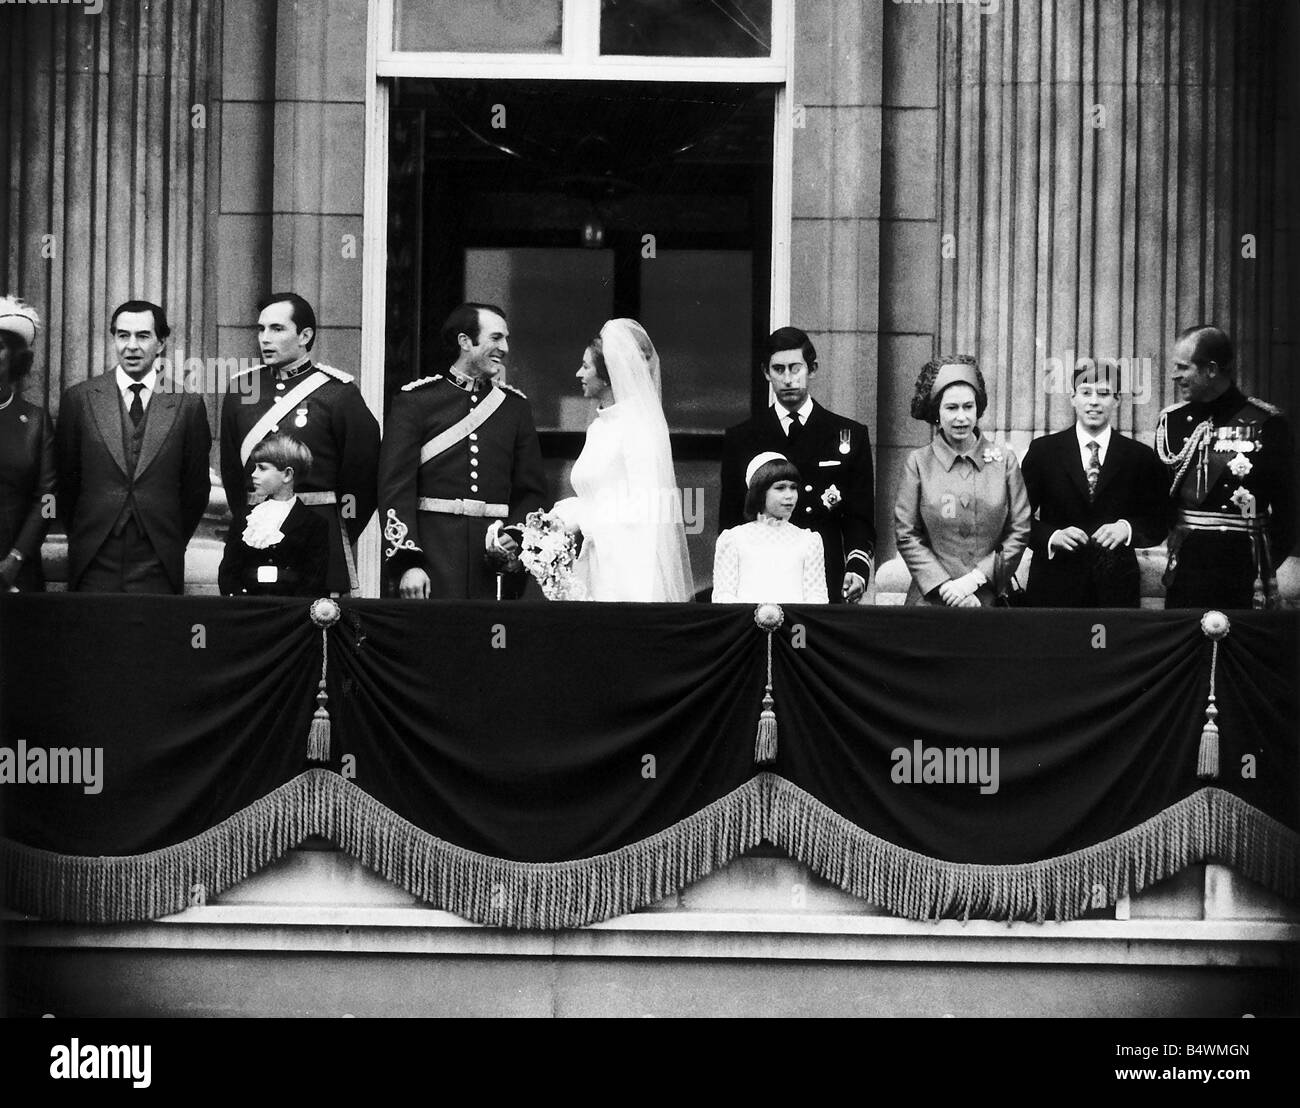 Princess Anne the daughter of Queen Elizabeth after her marriage to Captain Mark Phillips of the Queens Dragoon Guards at Westminster Abbey The couple are standing on the balcony of Buckingham Palace after the wedding breakfast with Major and Mrs Peter Phillips groomsman Captain Eric Grounds pageboy Prince Edward Mark Phillips and Anne Prince Charles bridesmaid Lady Sarah Armstrong Jones Queen Elizabeth Prince Andrew and Prince Philip November 1973 Stock Photo